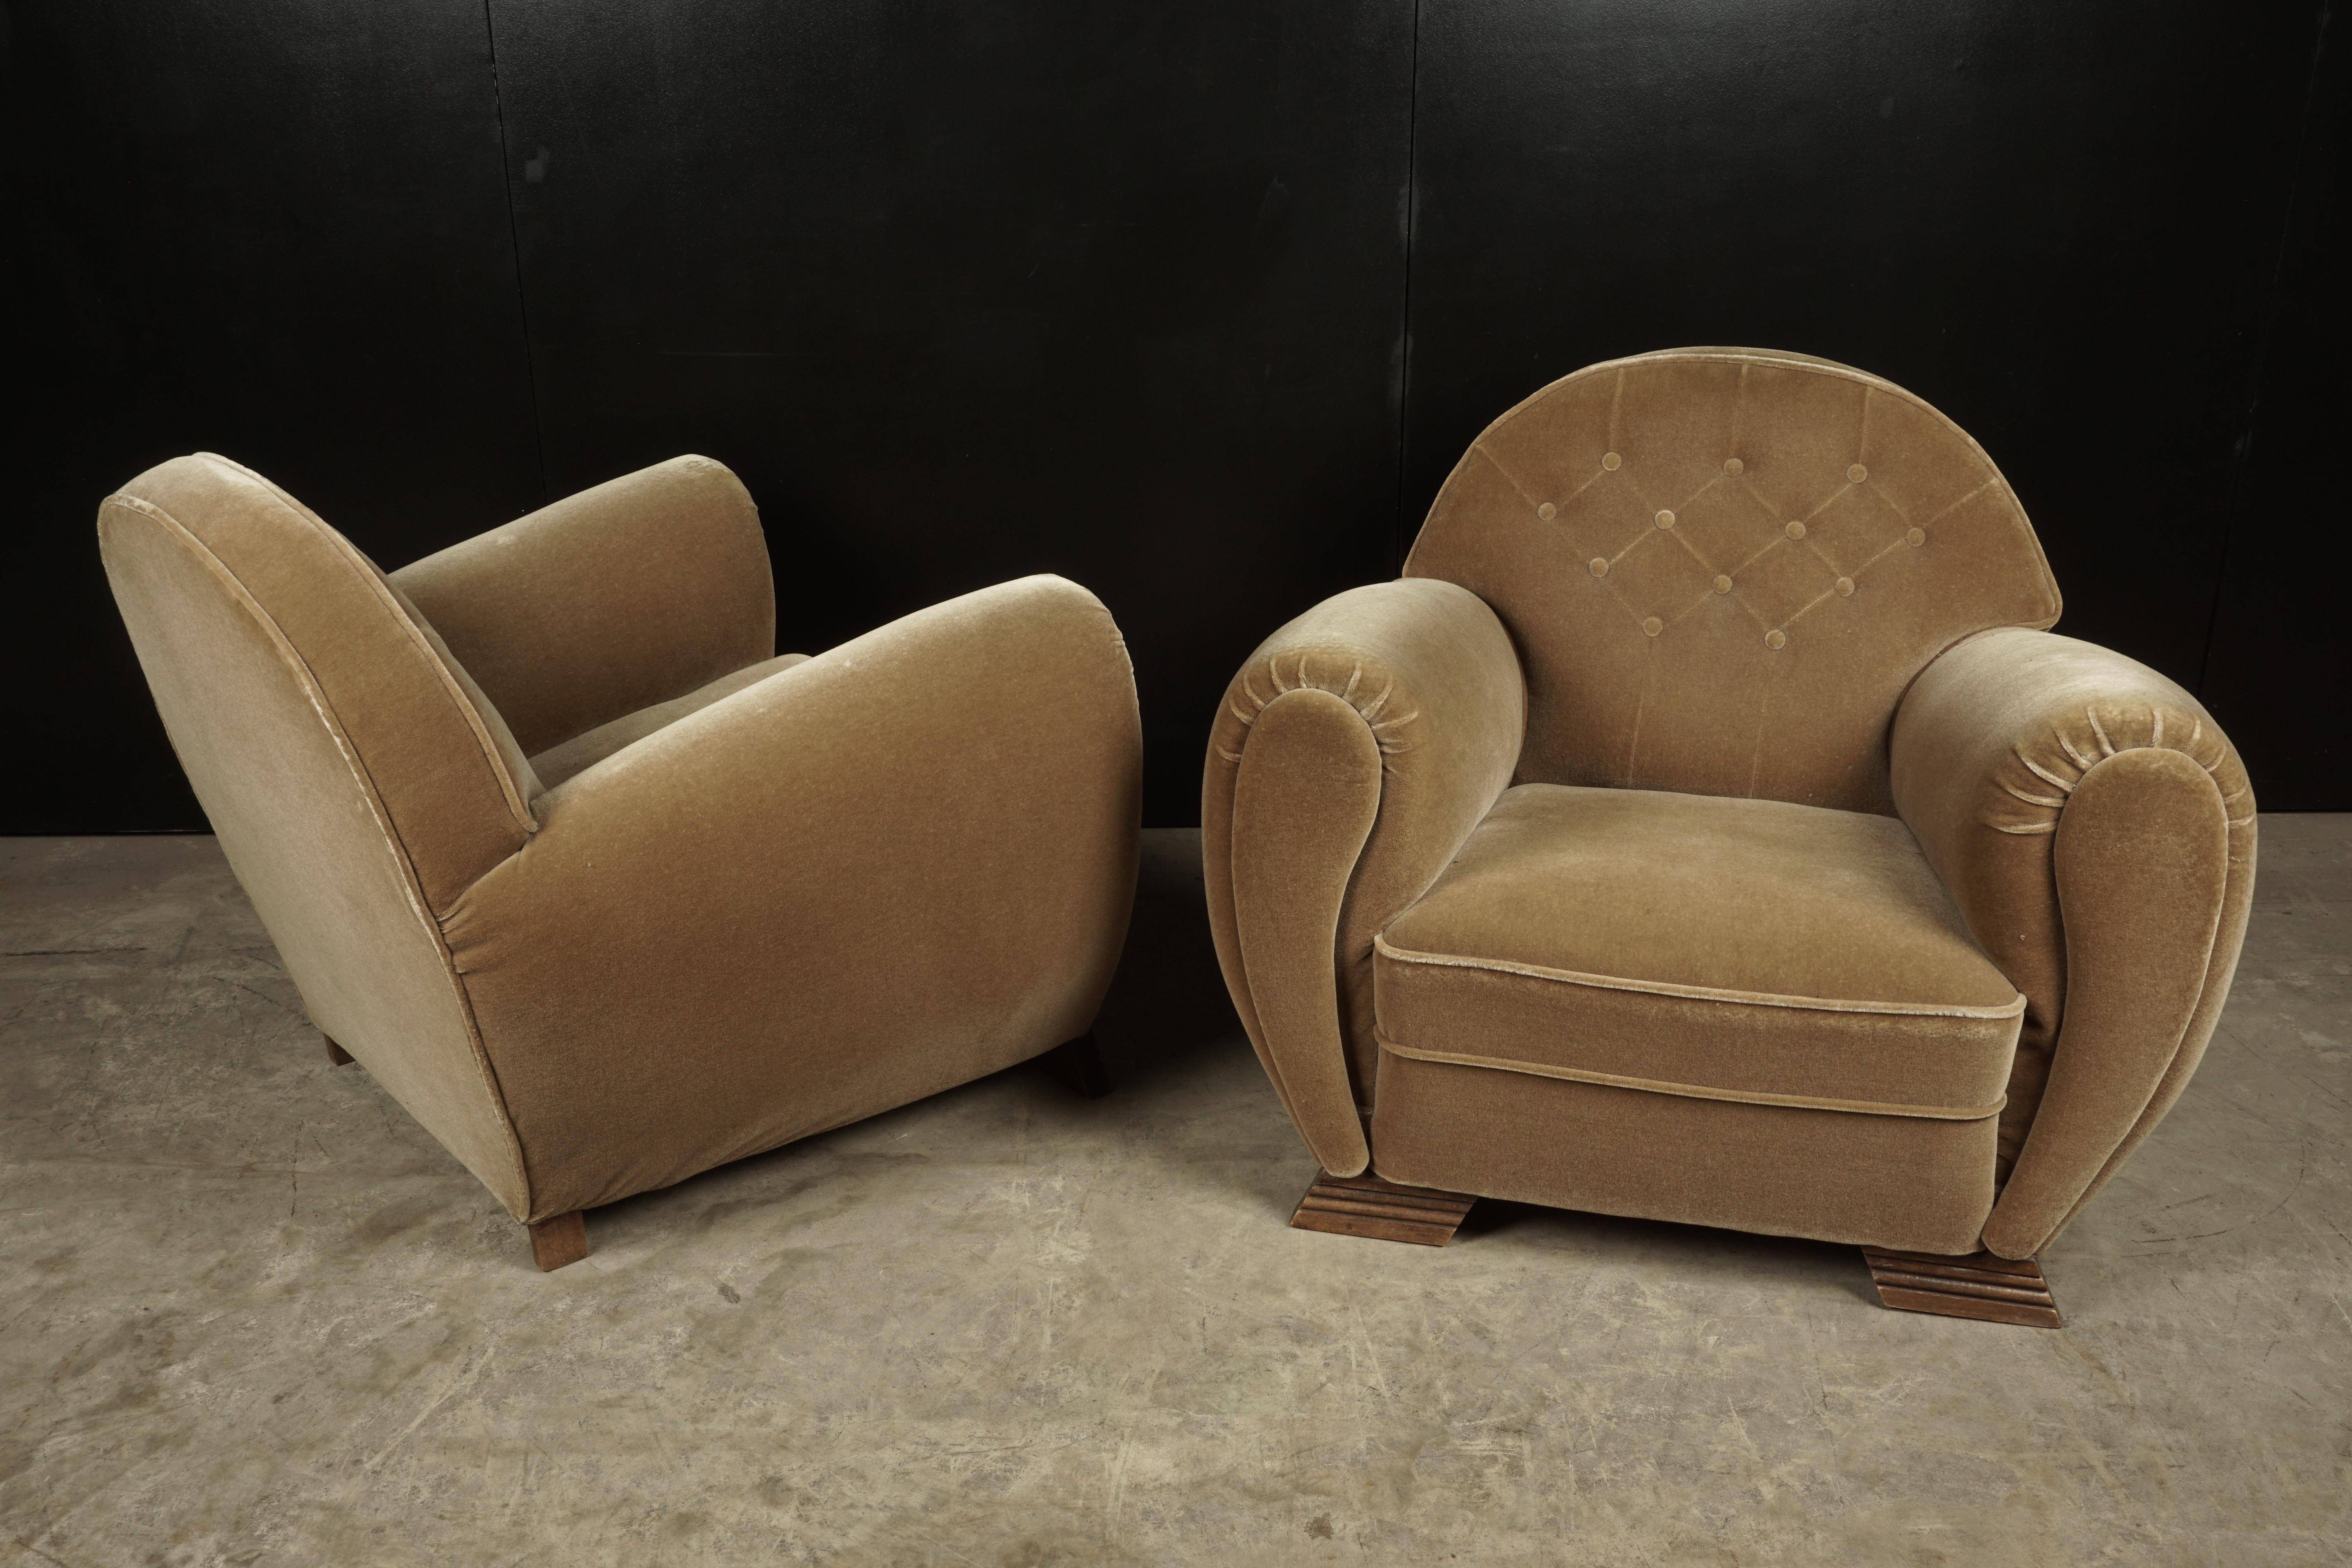 Rare pair of Art Deco lounge chairs from France, circa 1950. Original blush velour upholstery. Superb design.